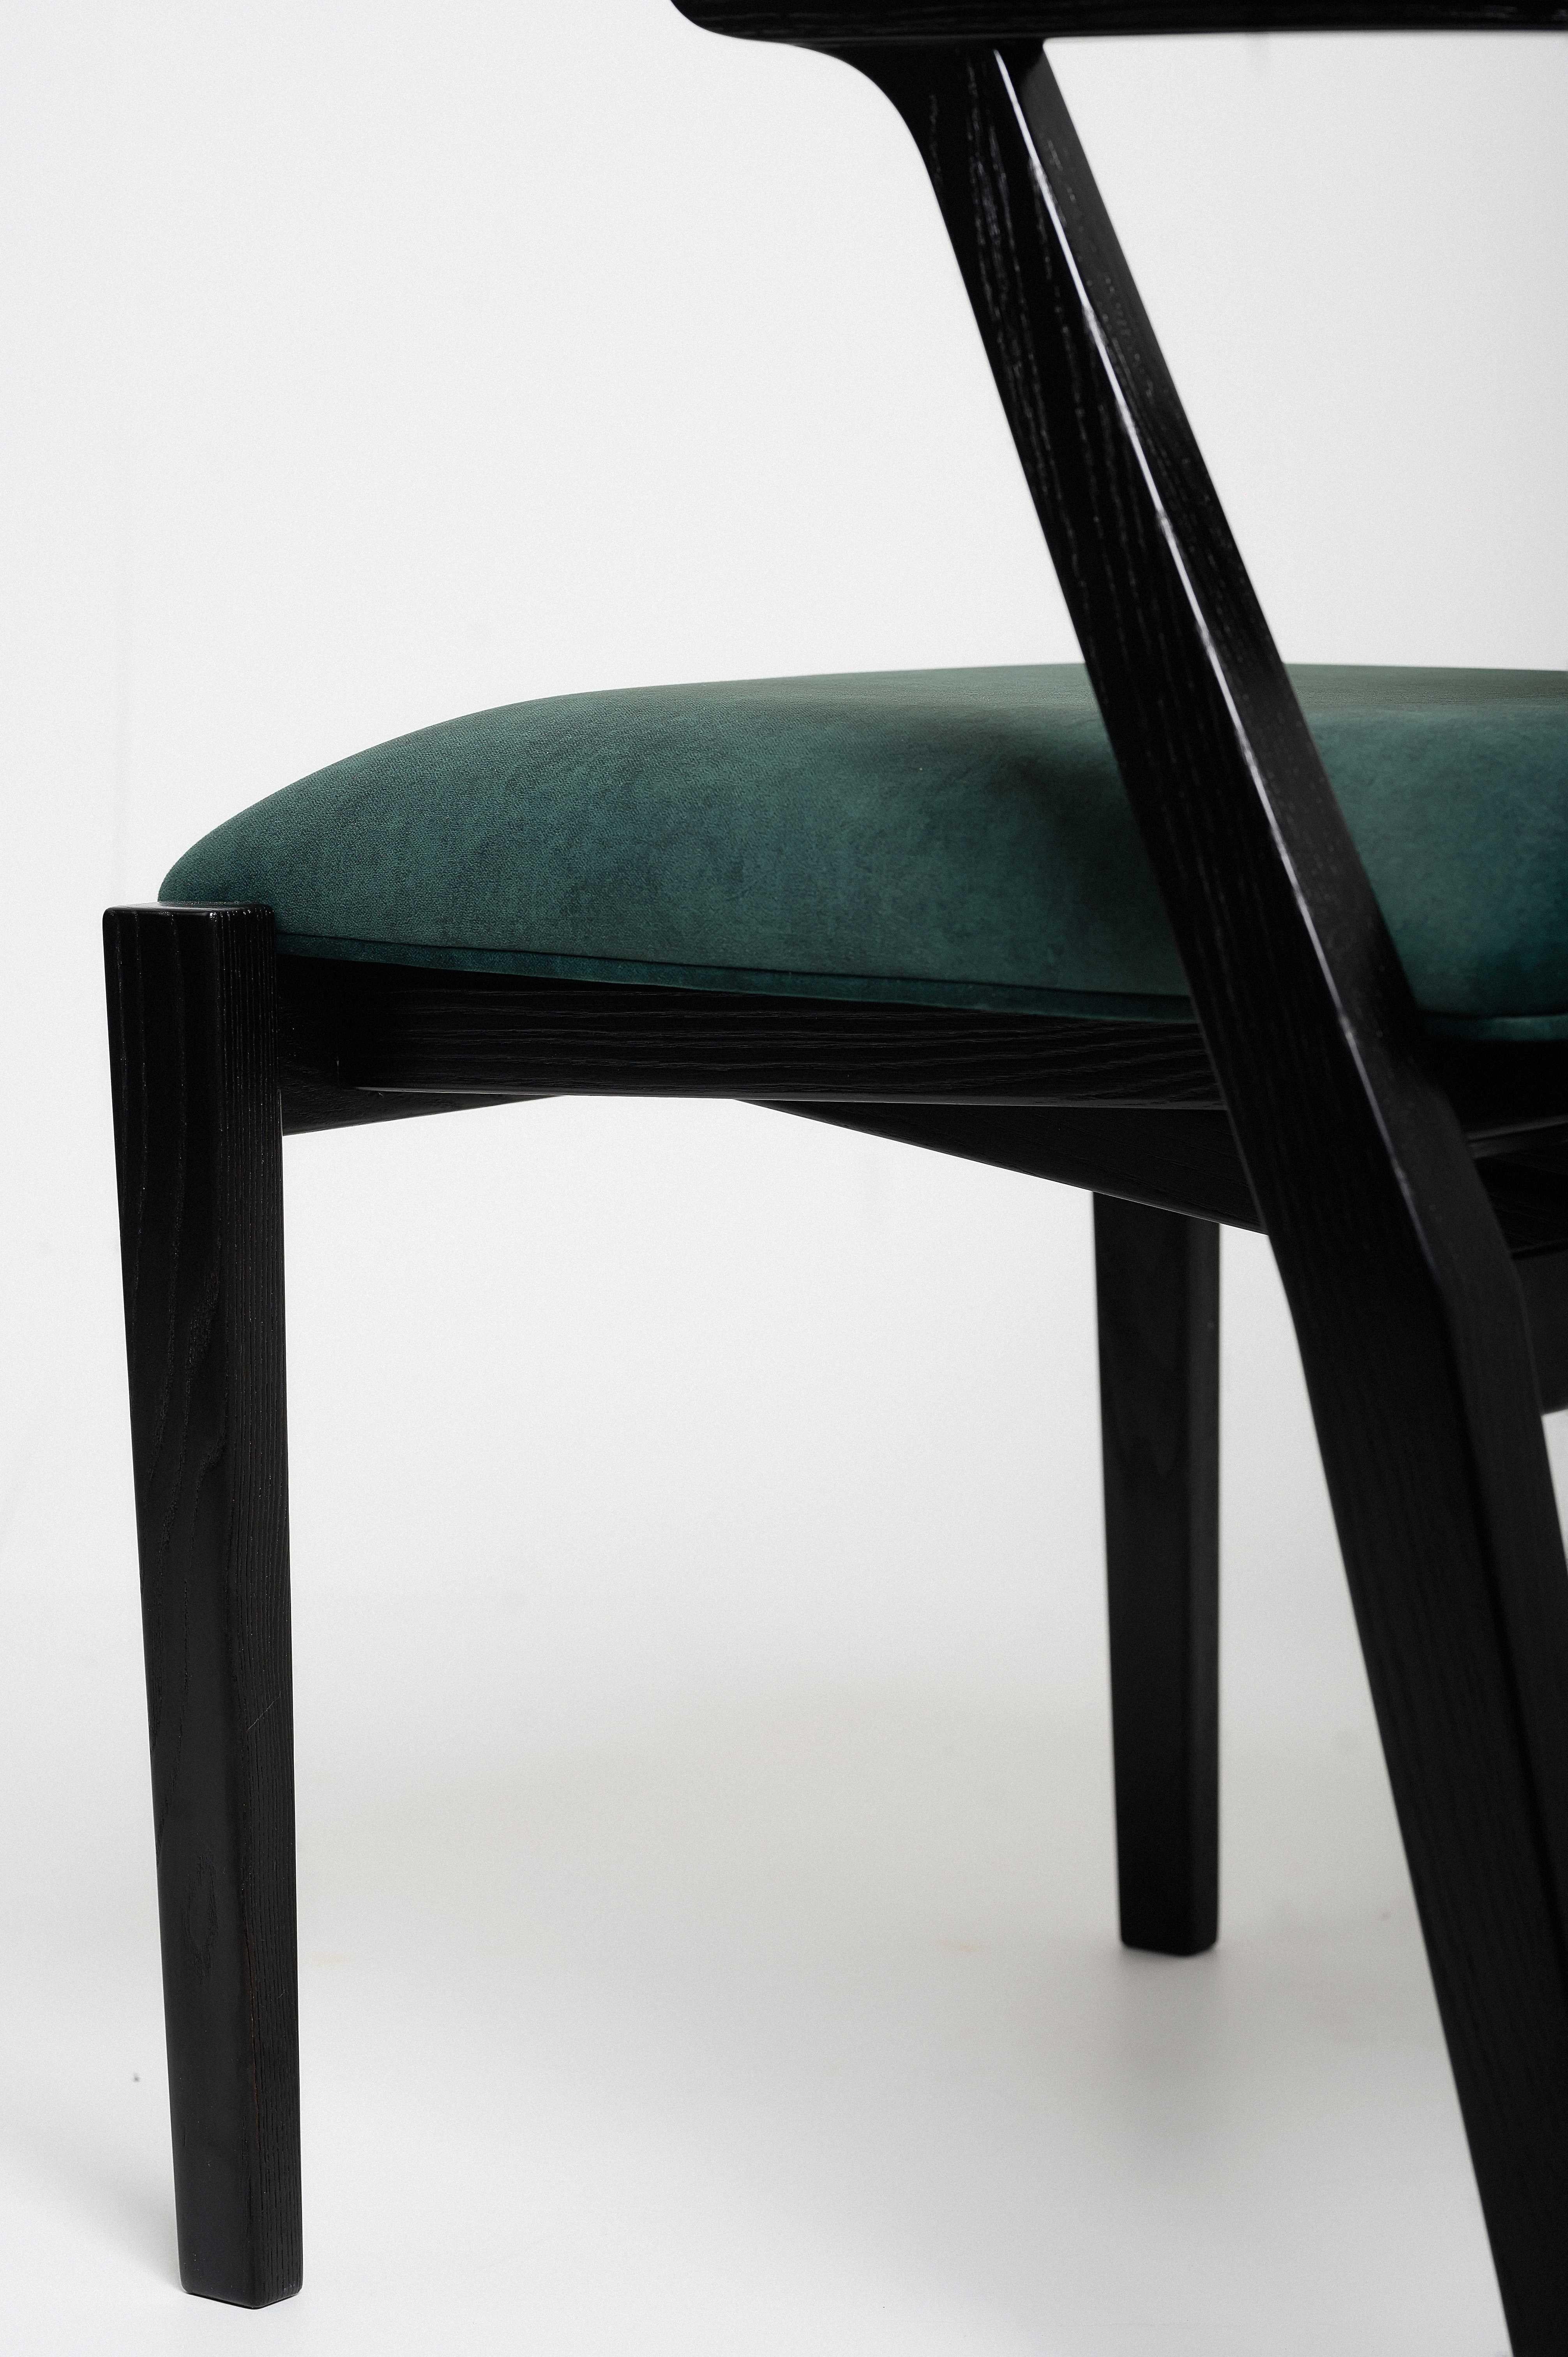 Contemporary Modern Dining Room Chairs in Black Solid Wood and Emerald Material For Sale